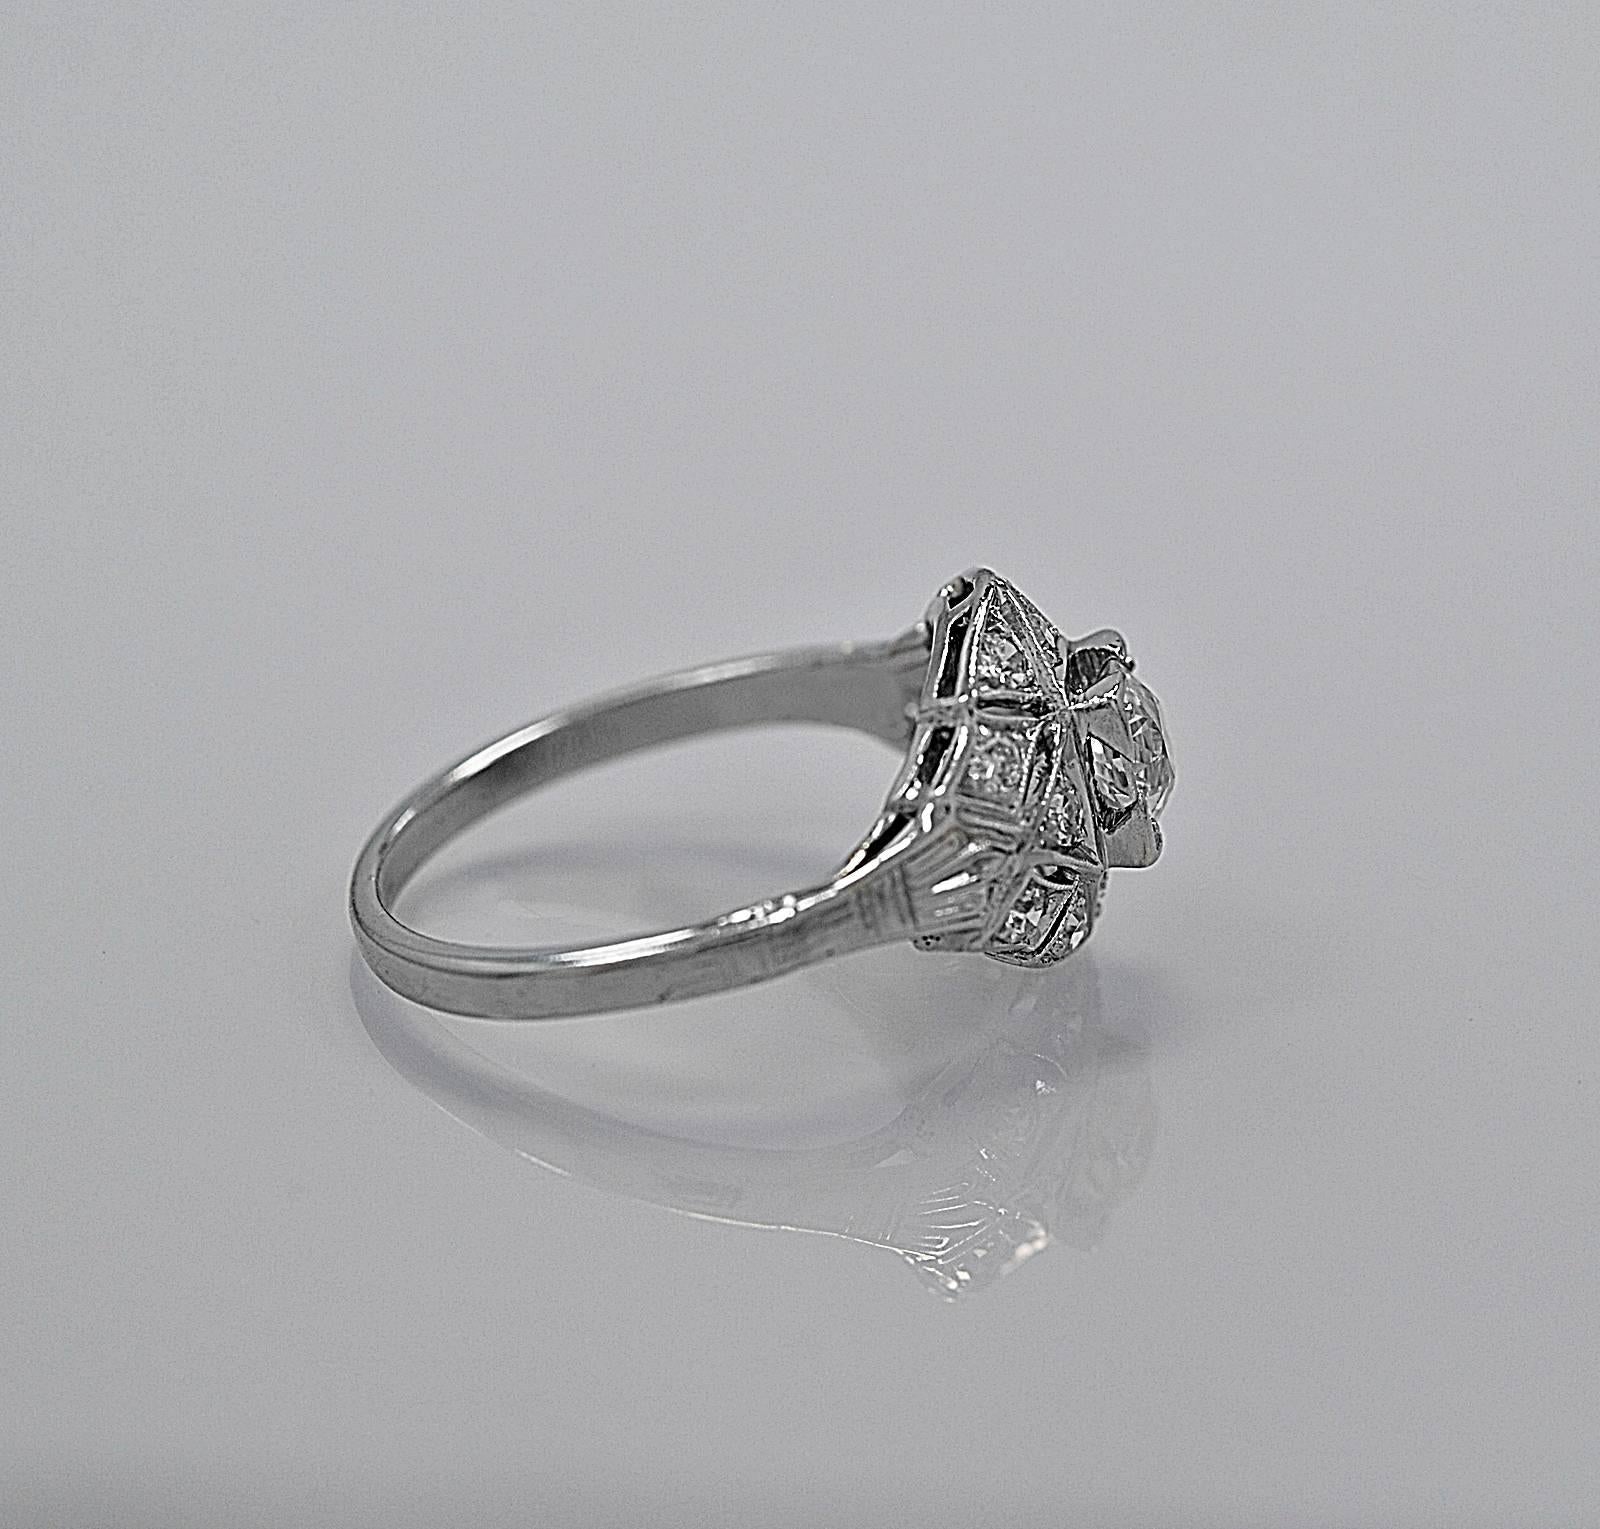 This painstakingly intricate Art Deco diamond engagement ring crafted in platinum which is known for its durability and enduring beauty. This ring features a .40ct. apx. European cut diamond with VS1 clarity and L-M color. The shimmering single cut